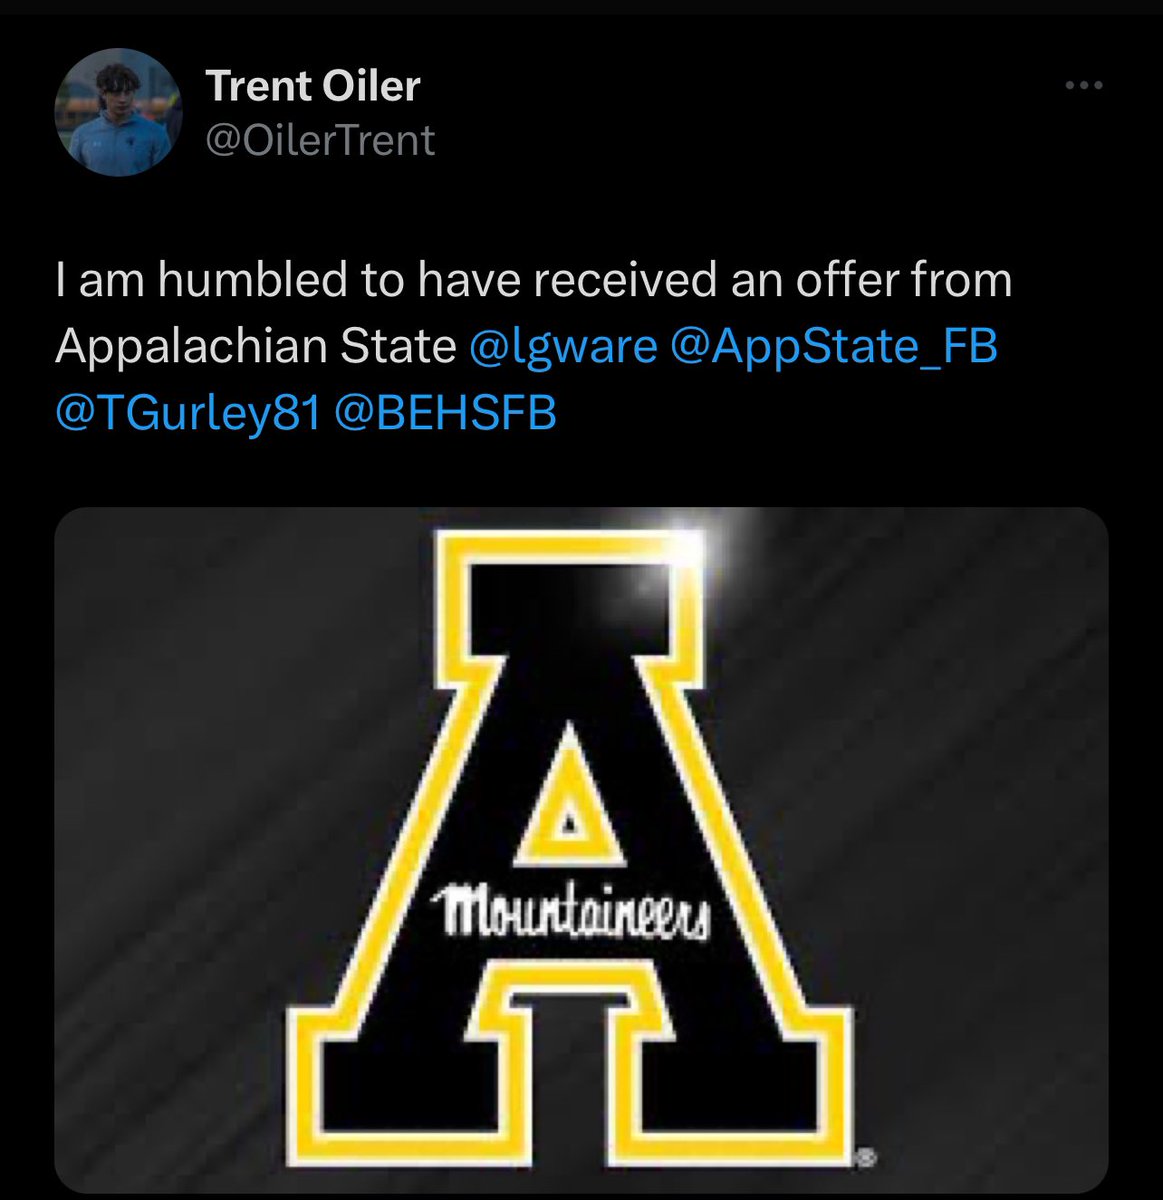 Congrats @OilerTrent on the @AppState_FB offer!!! We get #offers & #results at Torigurley.com Sign Up Now